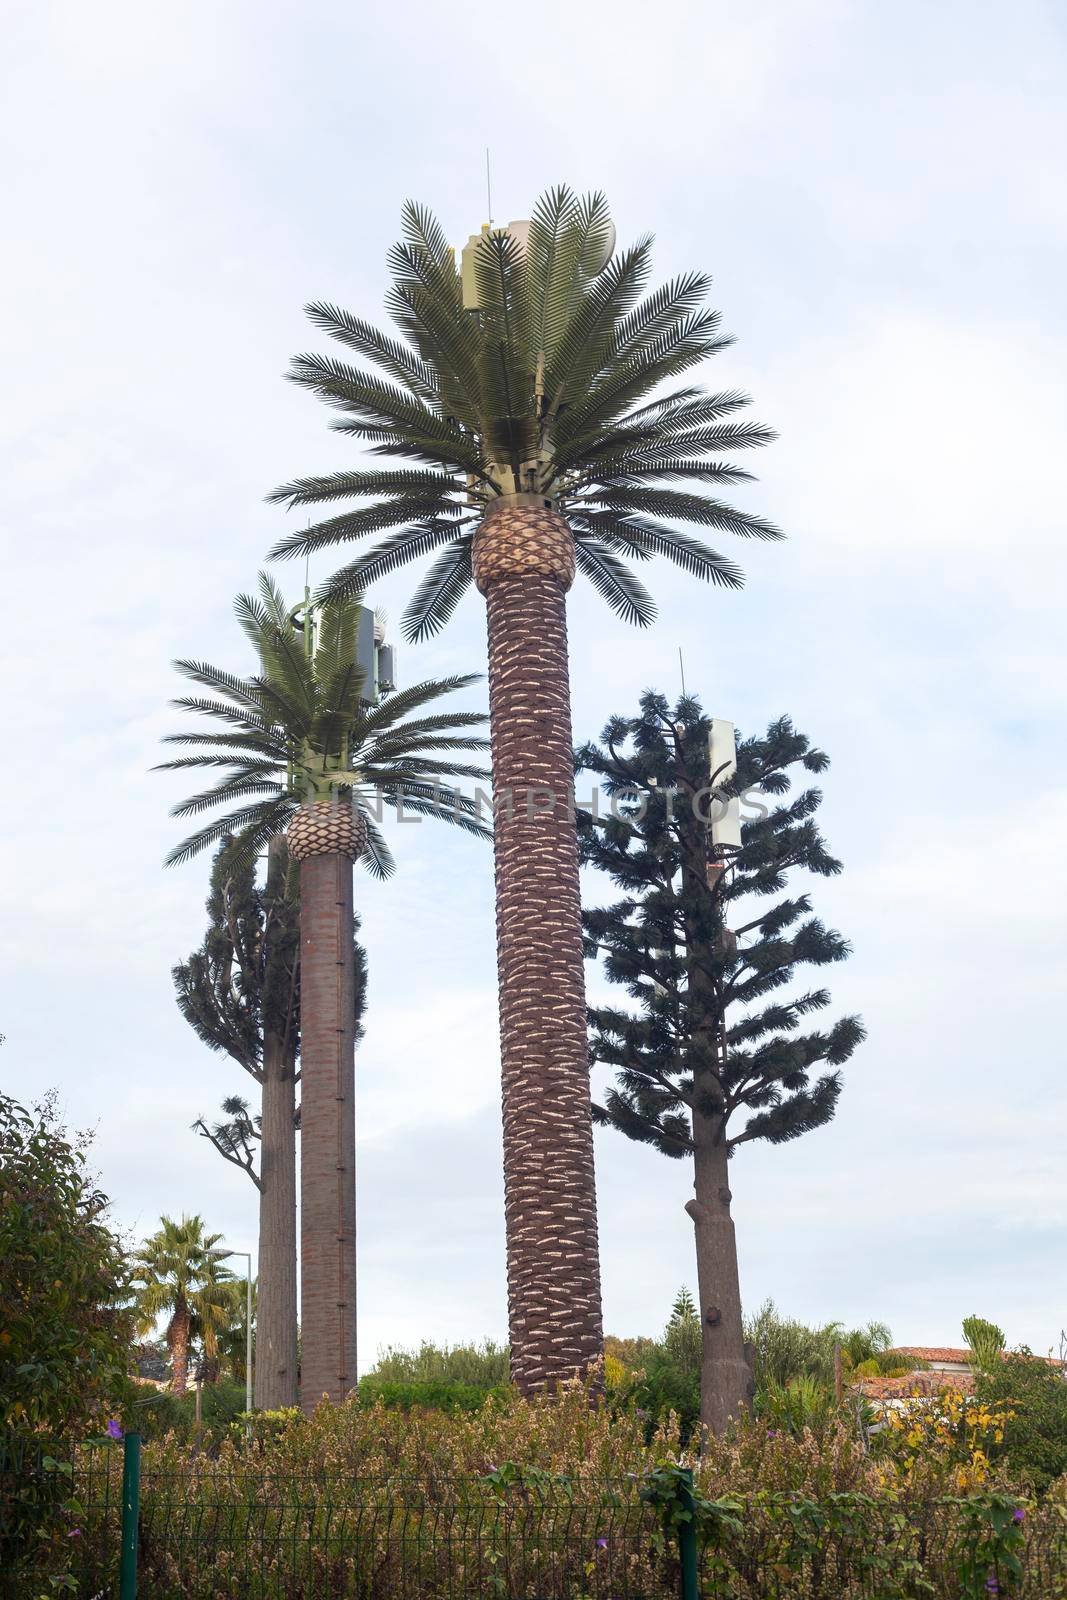 recievers and transmitters imitating palm trees